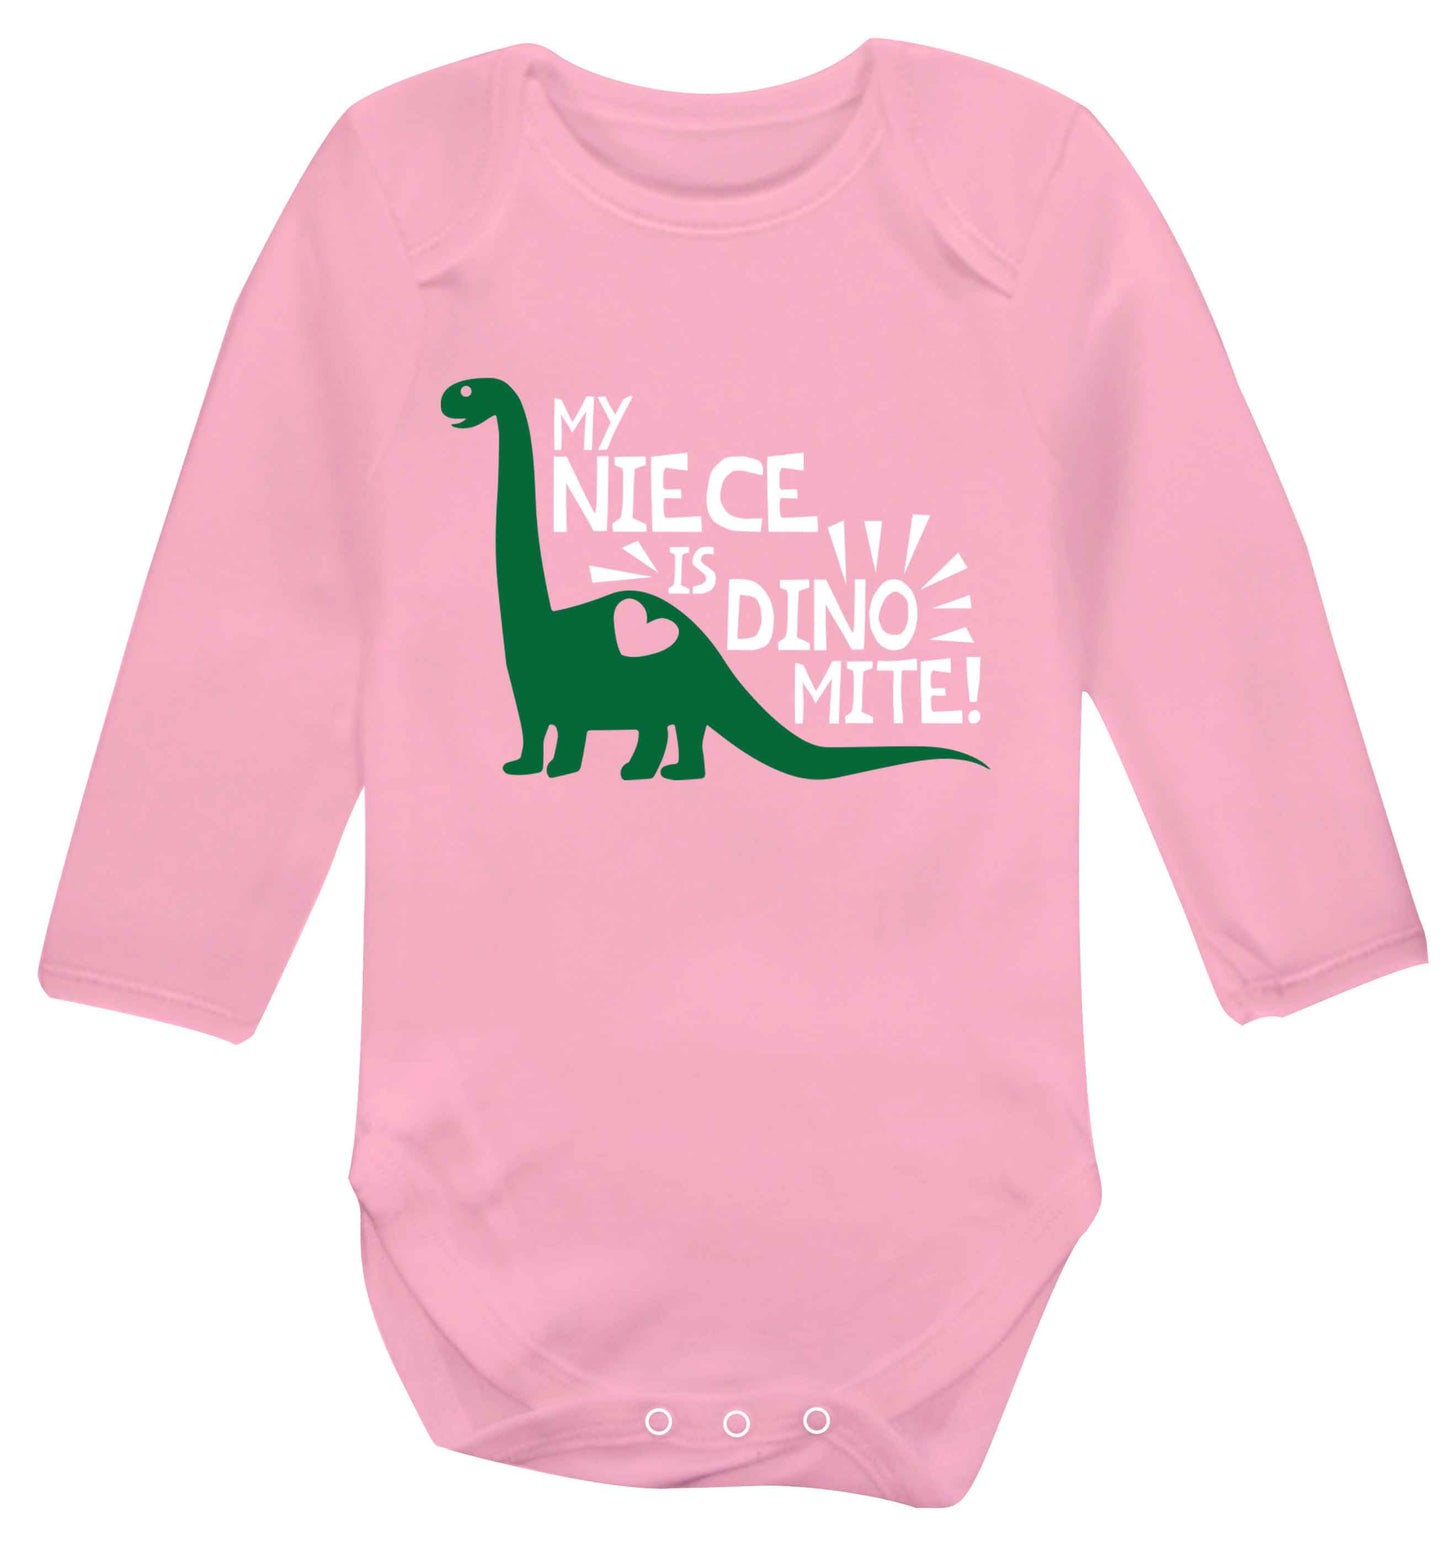 My niece is dinomite! Baby Vest long sleeved pale pink 6-12 months